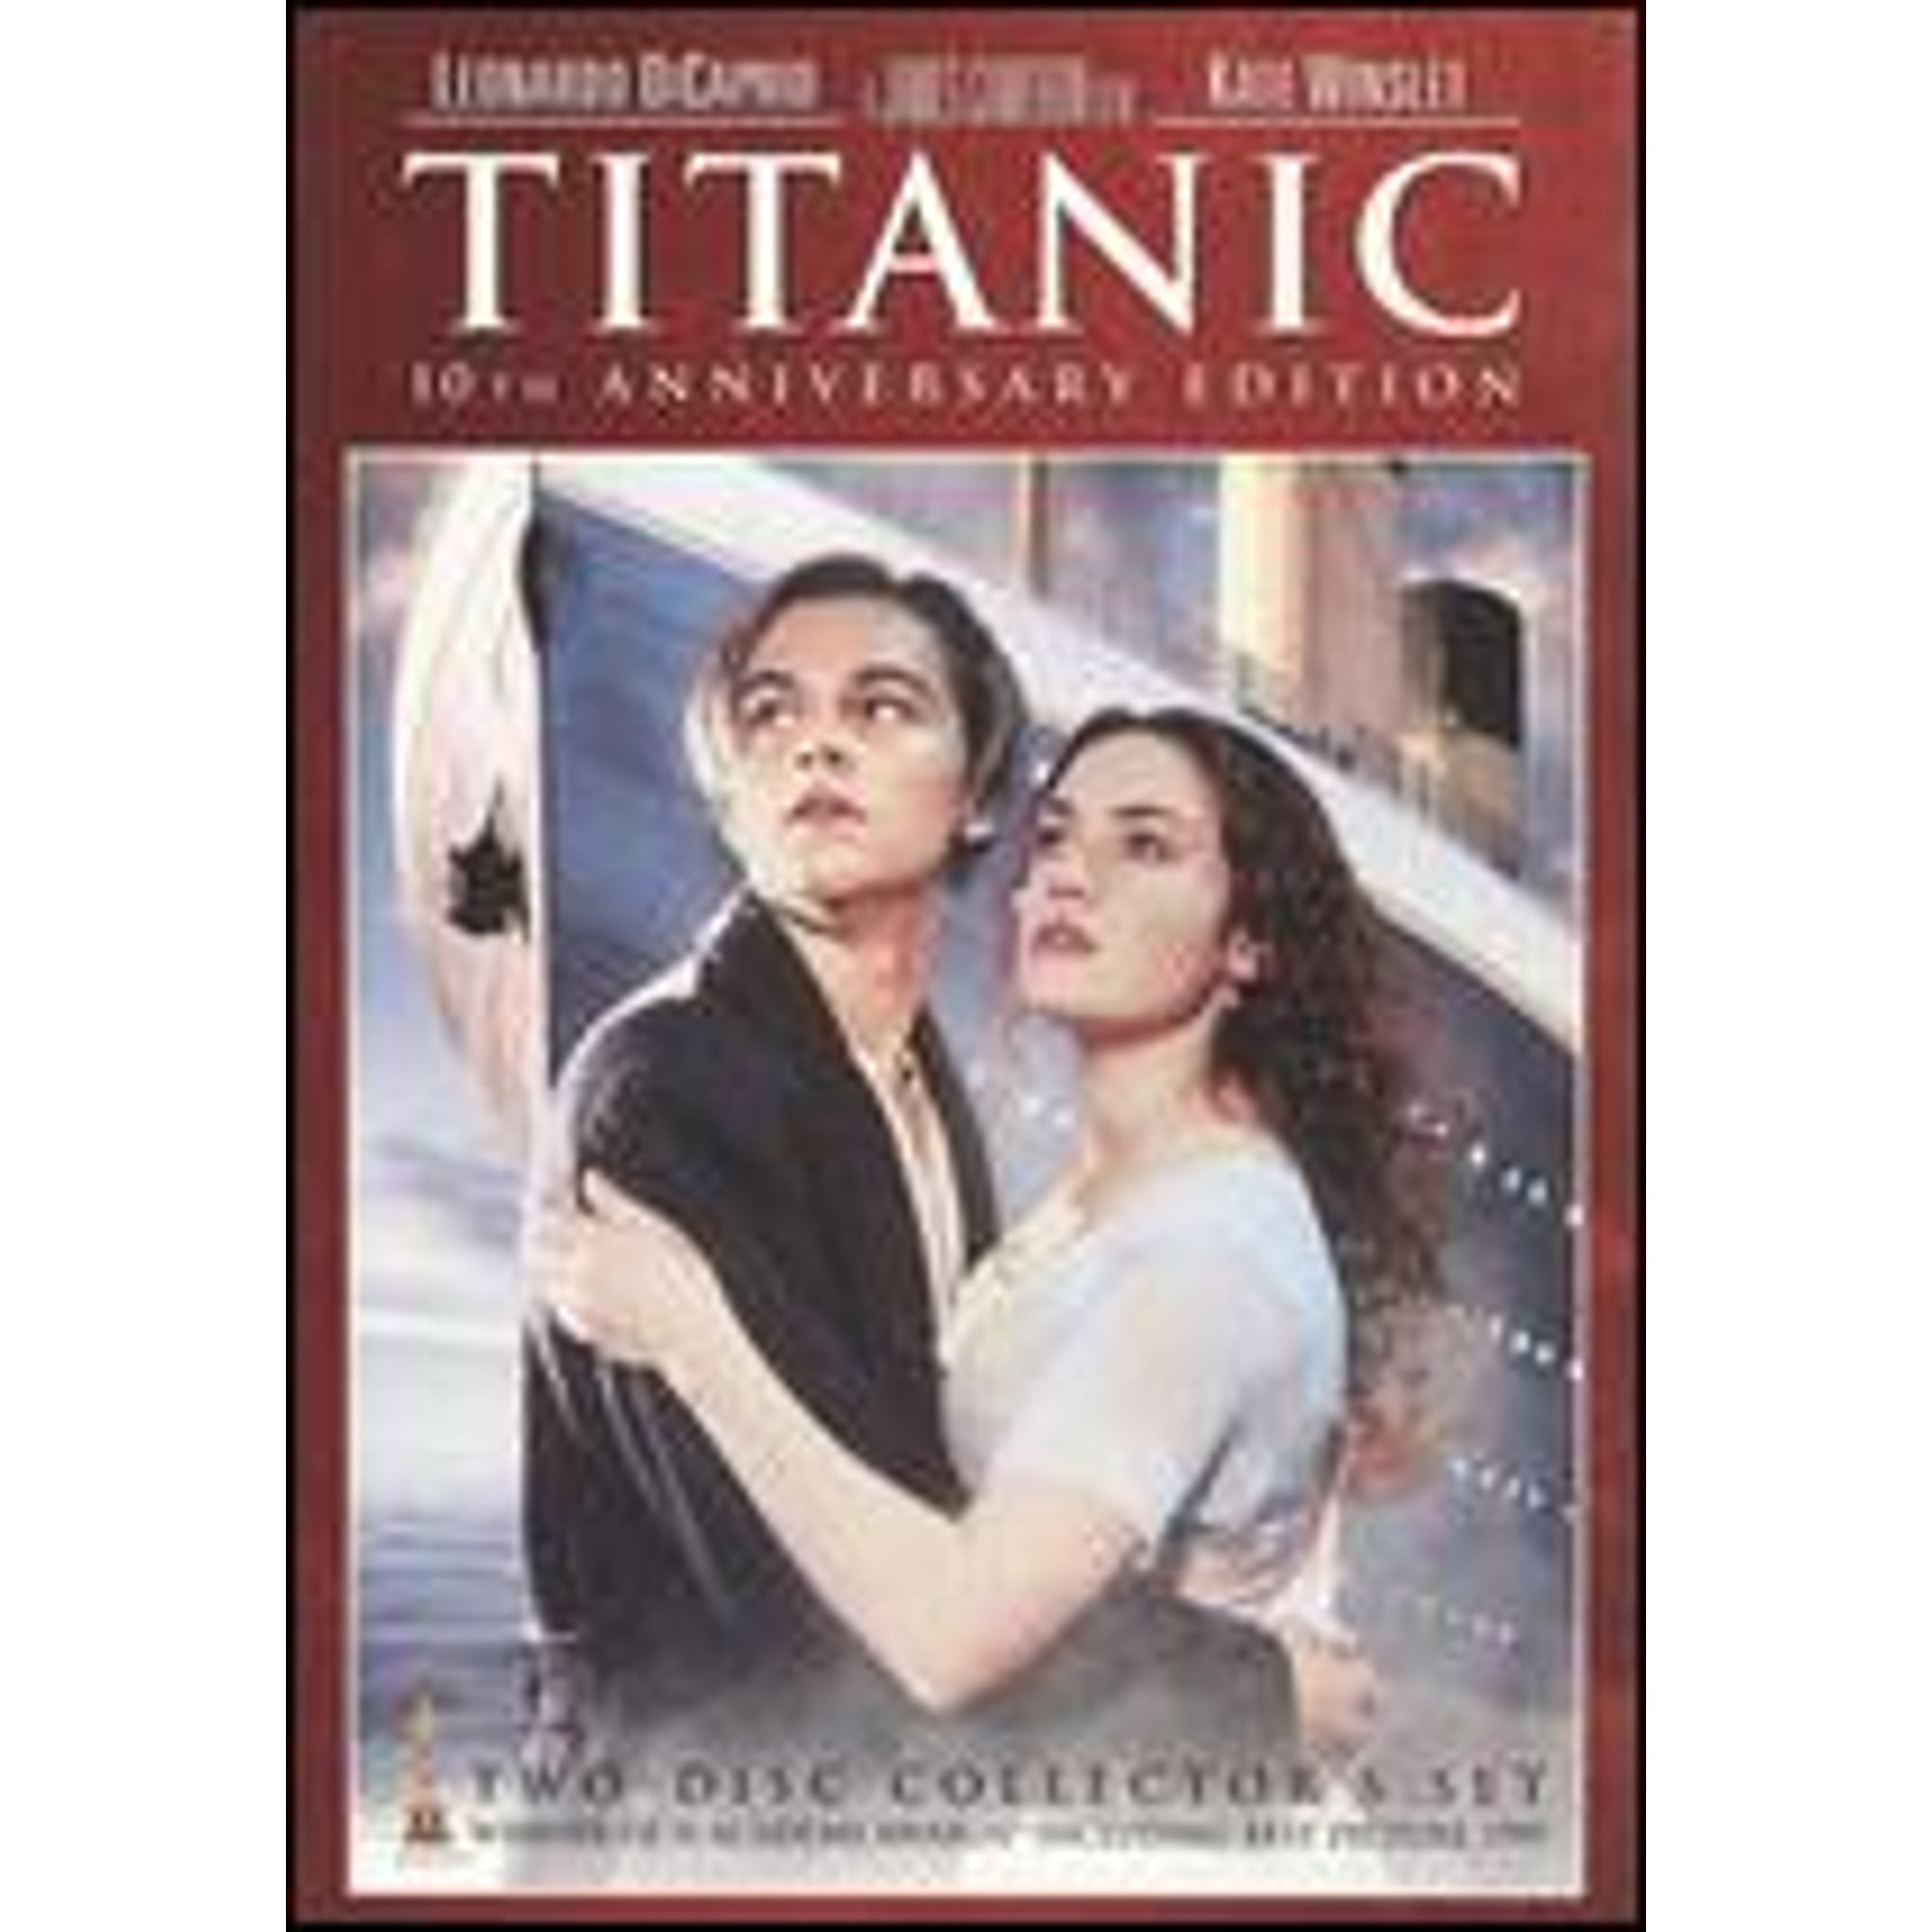 titanic was directed by